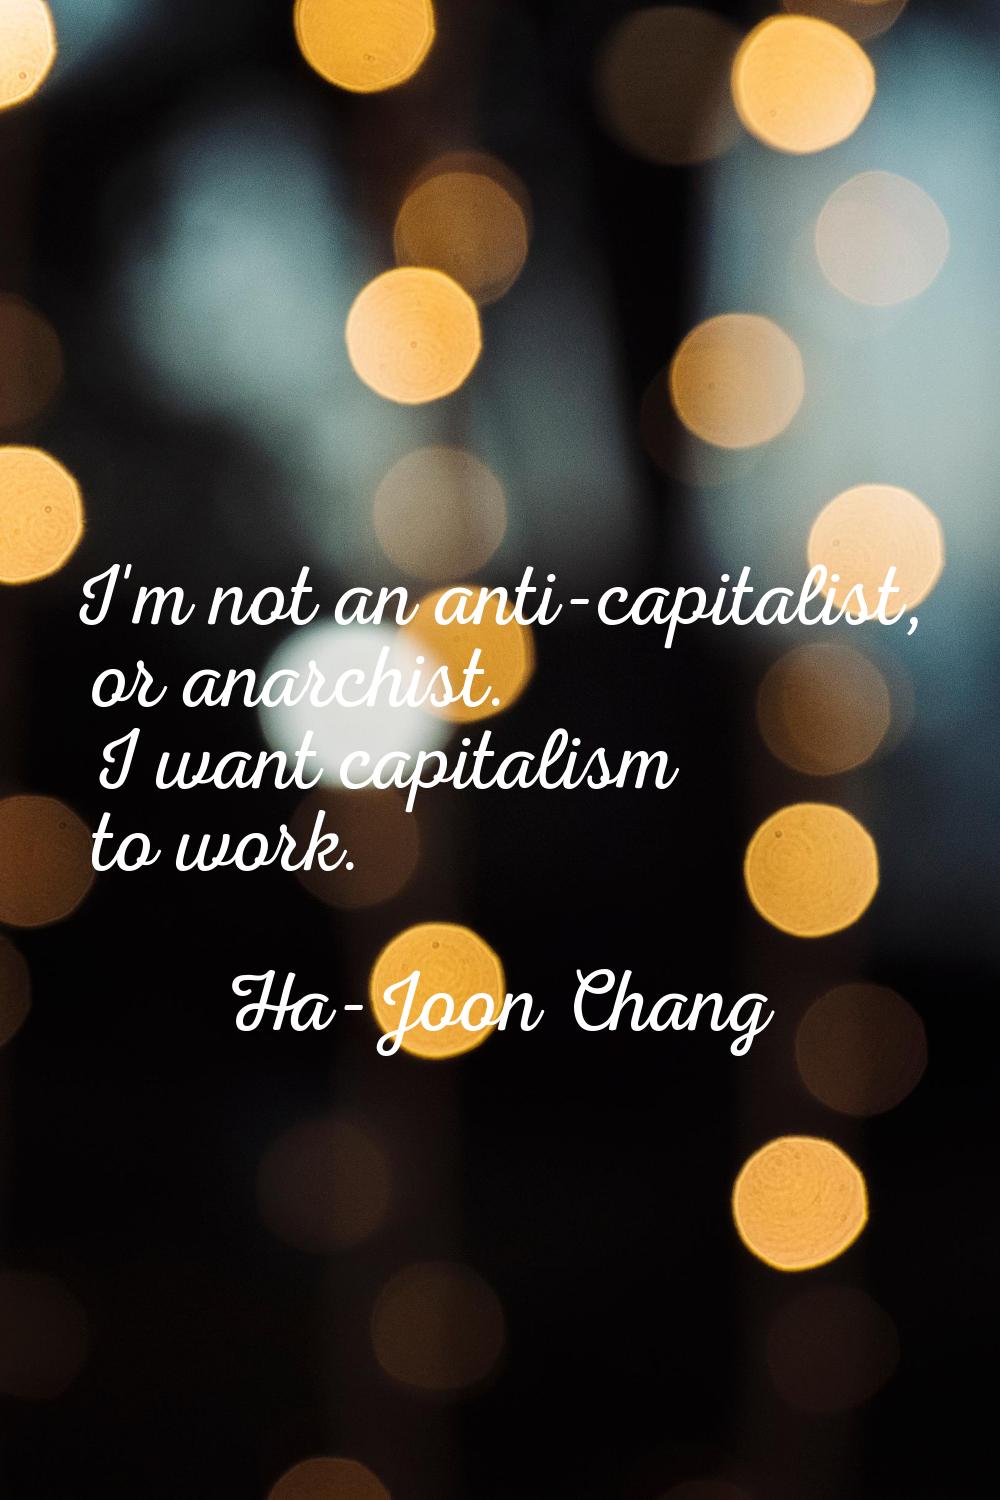 I'm not an anti-capitalist, or anarchist. I want capitalism to work.